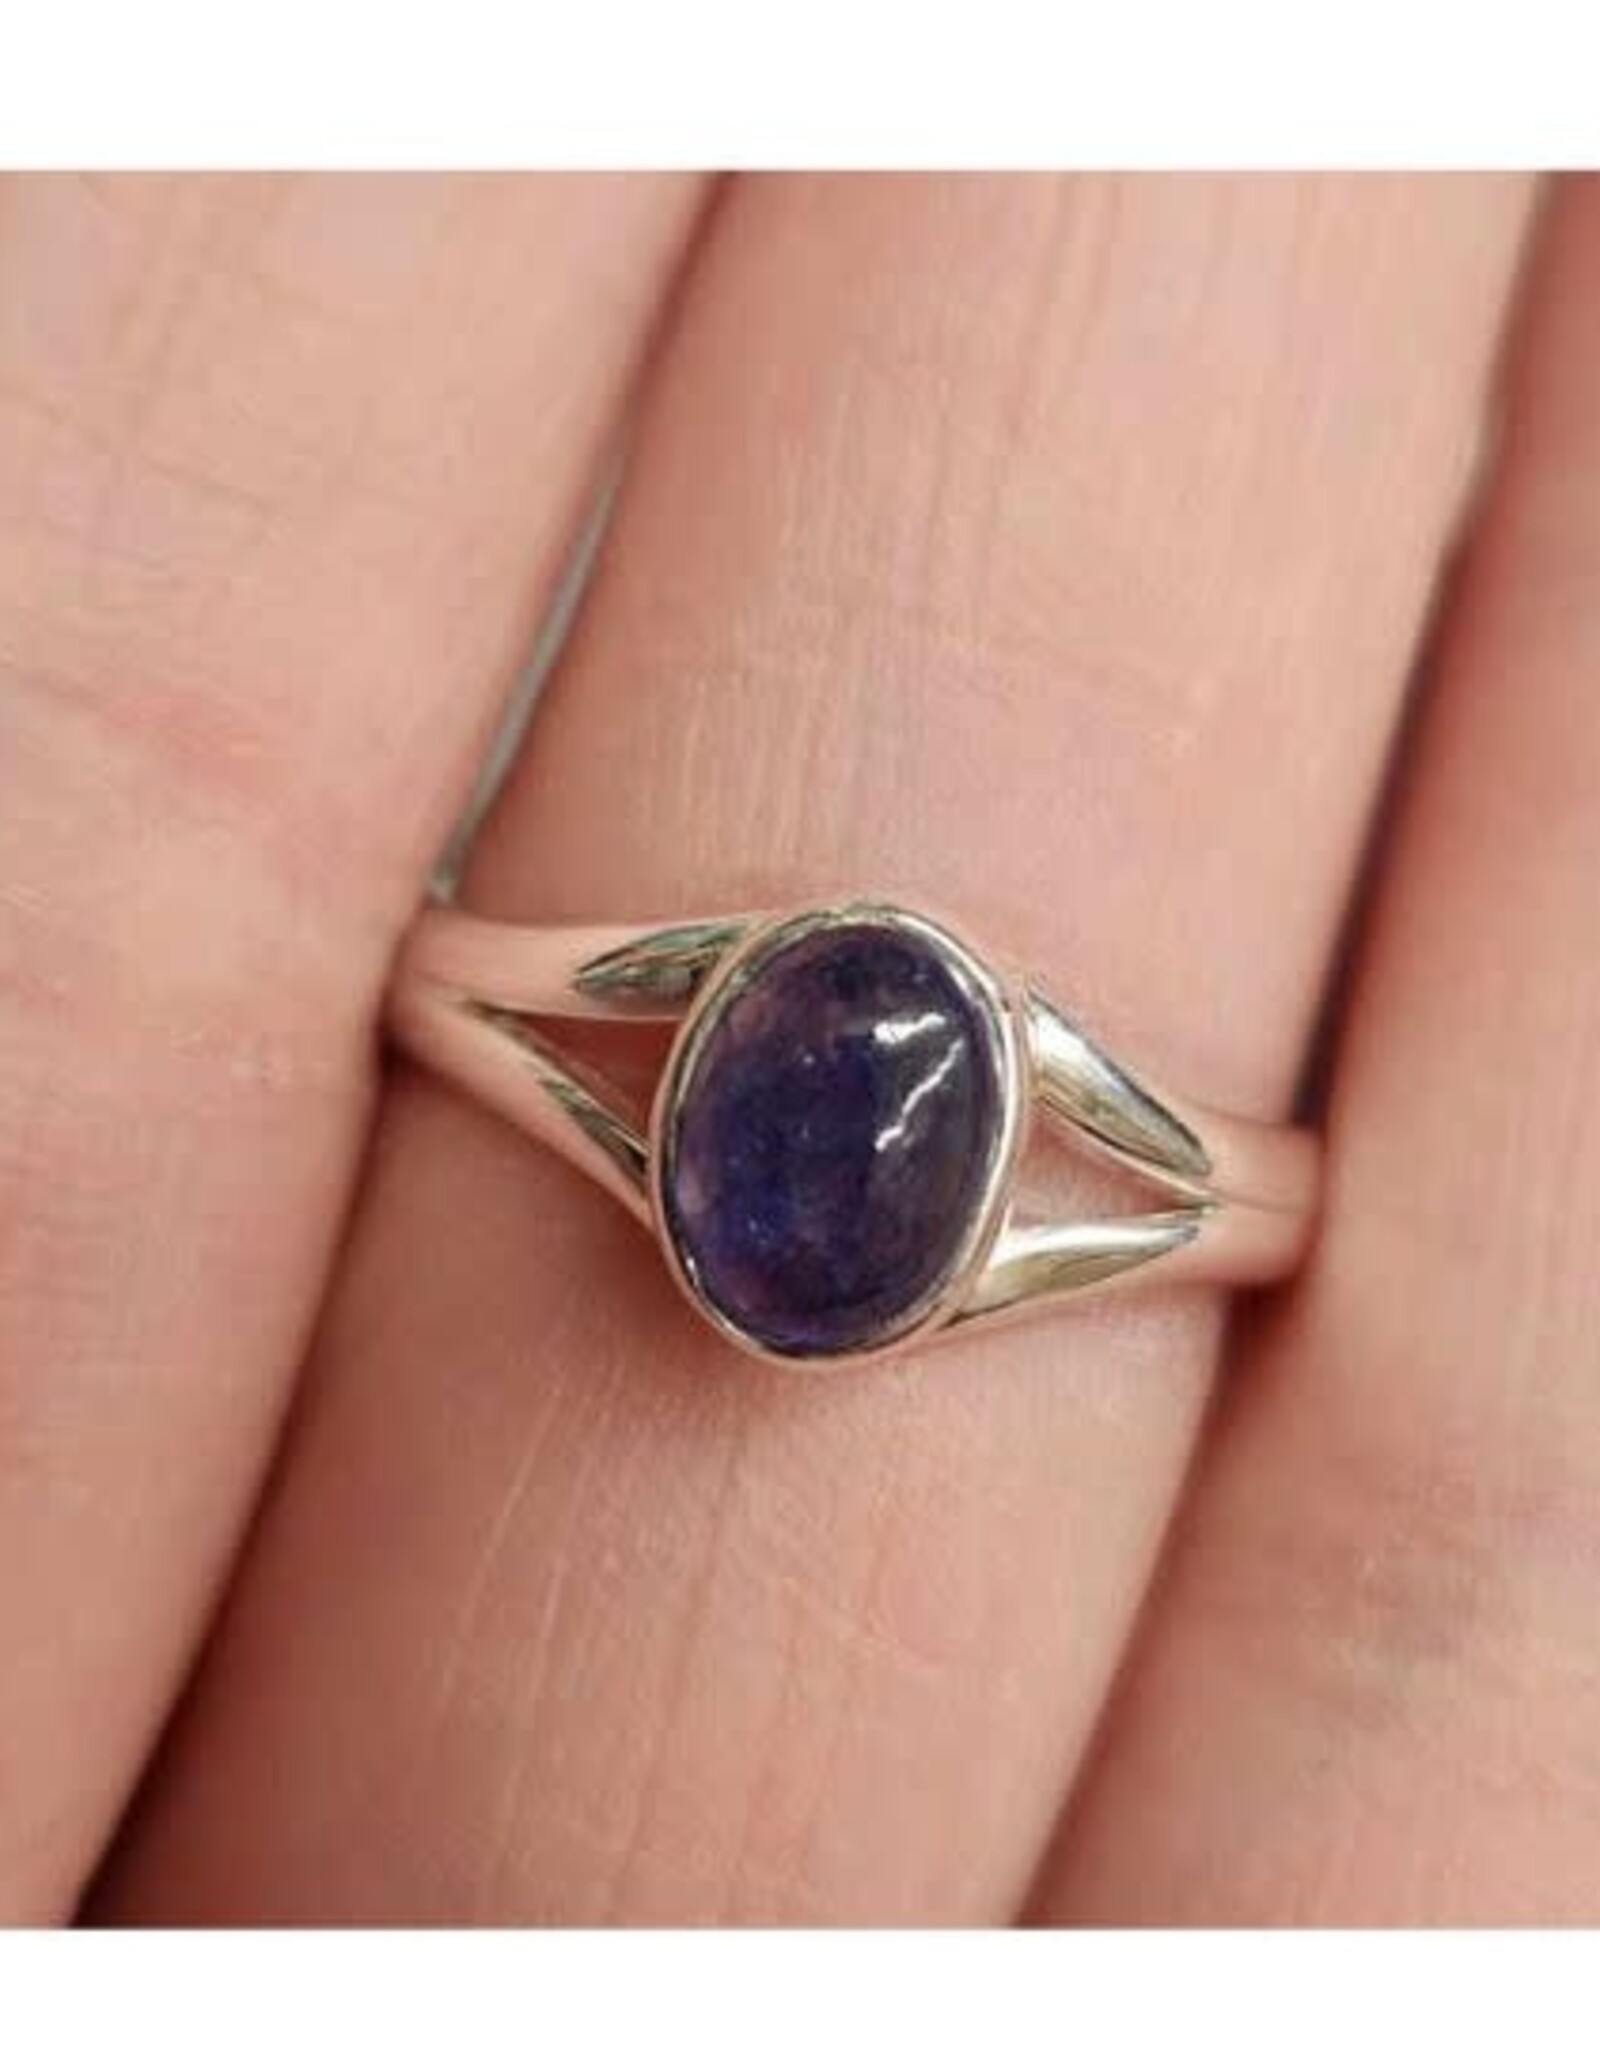 Sapphire Ring - Size 10 Sterling Silver